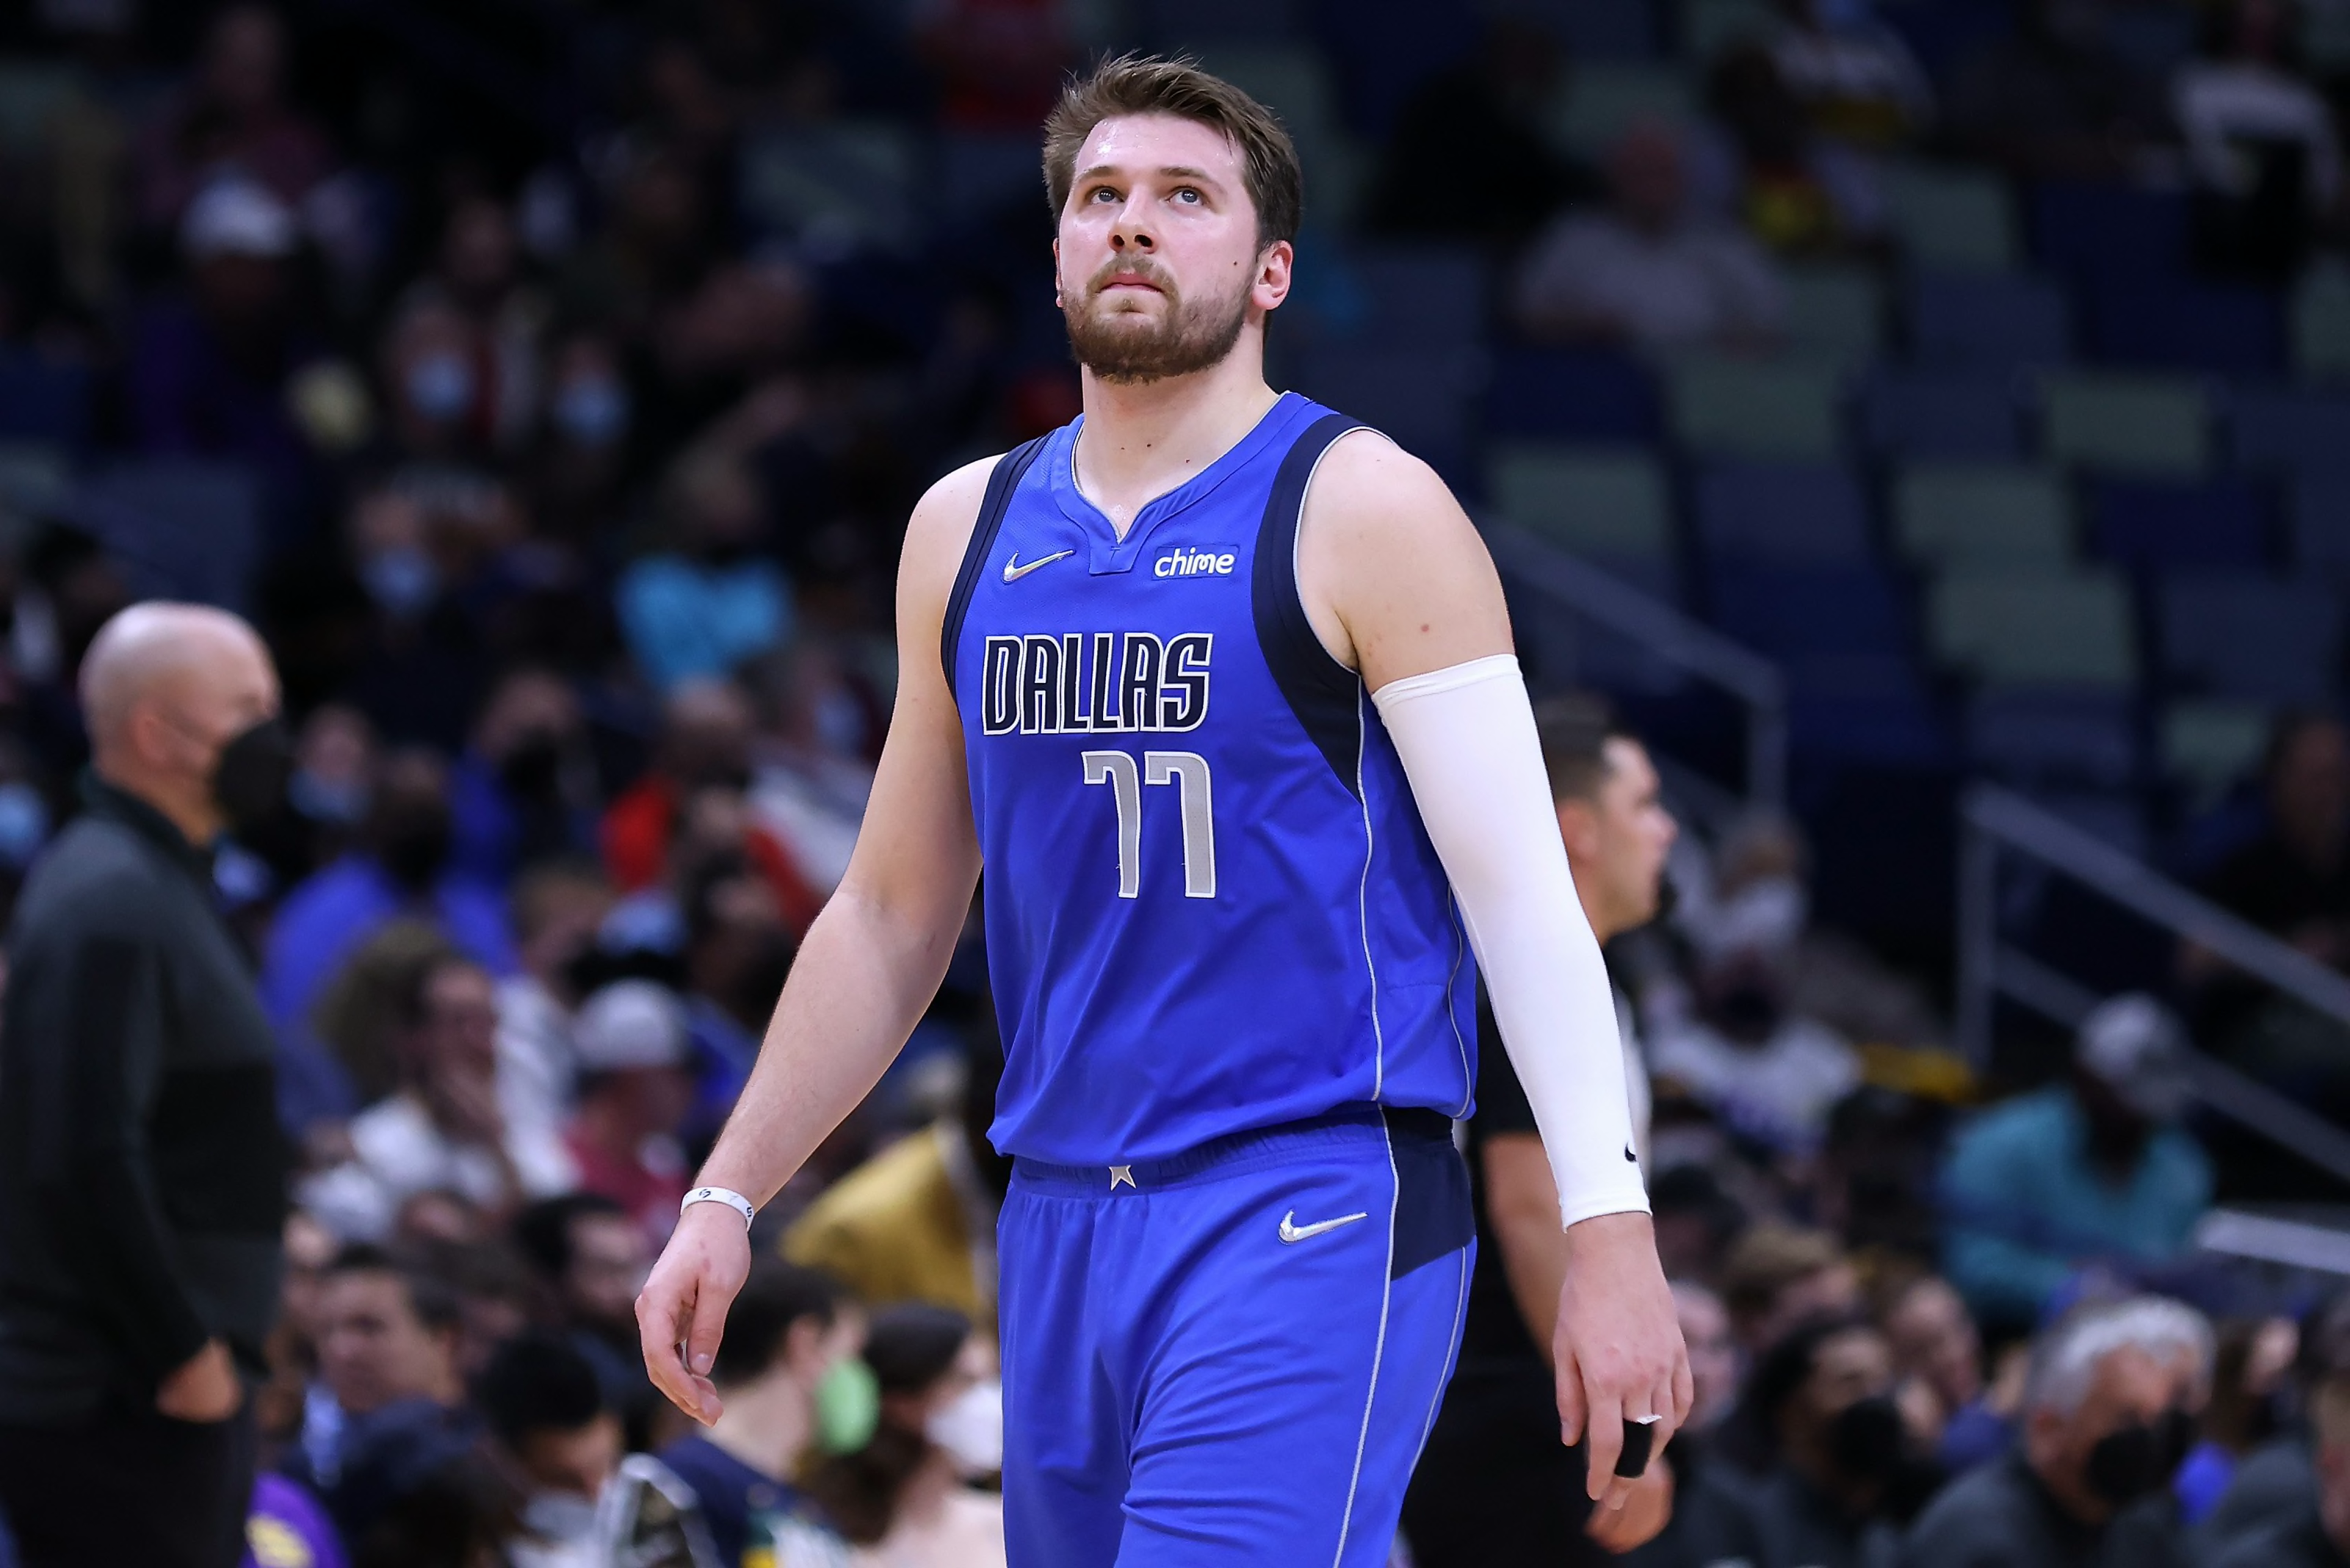 Can Luka Doncic lead the Mavericks to a title by himself?